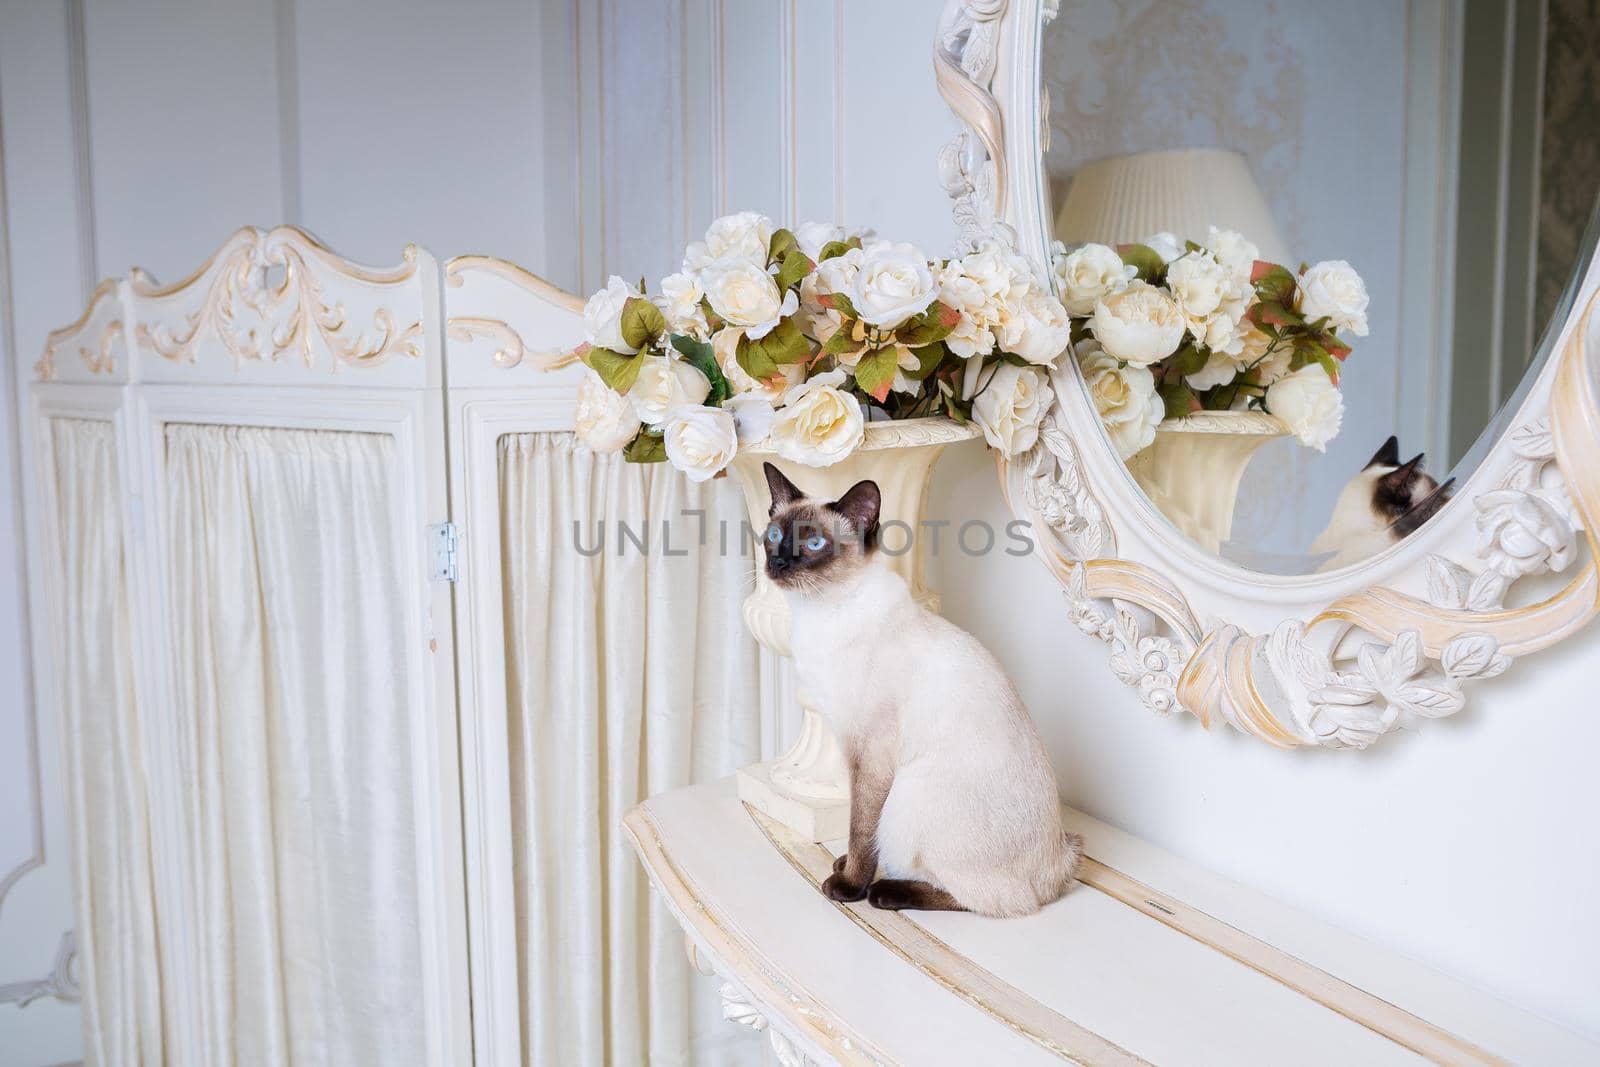 two color cat without tail Mekong Bobtail breed with jewel precious necklace of pearls around neck. Cat And necklace. Blue eyed Female Cat of Breed Mekong Bobtail, Sitting with gems on the neck.